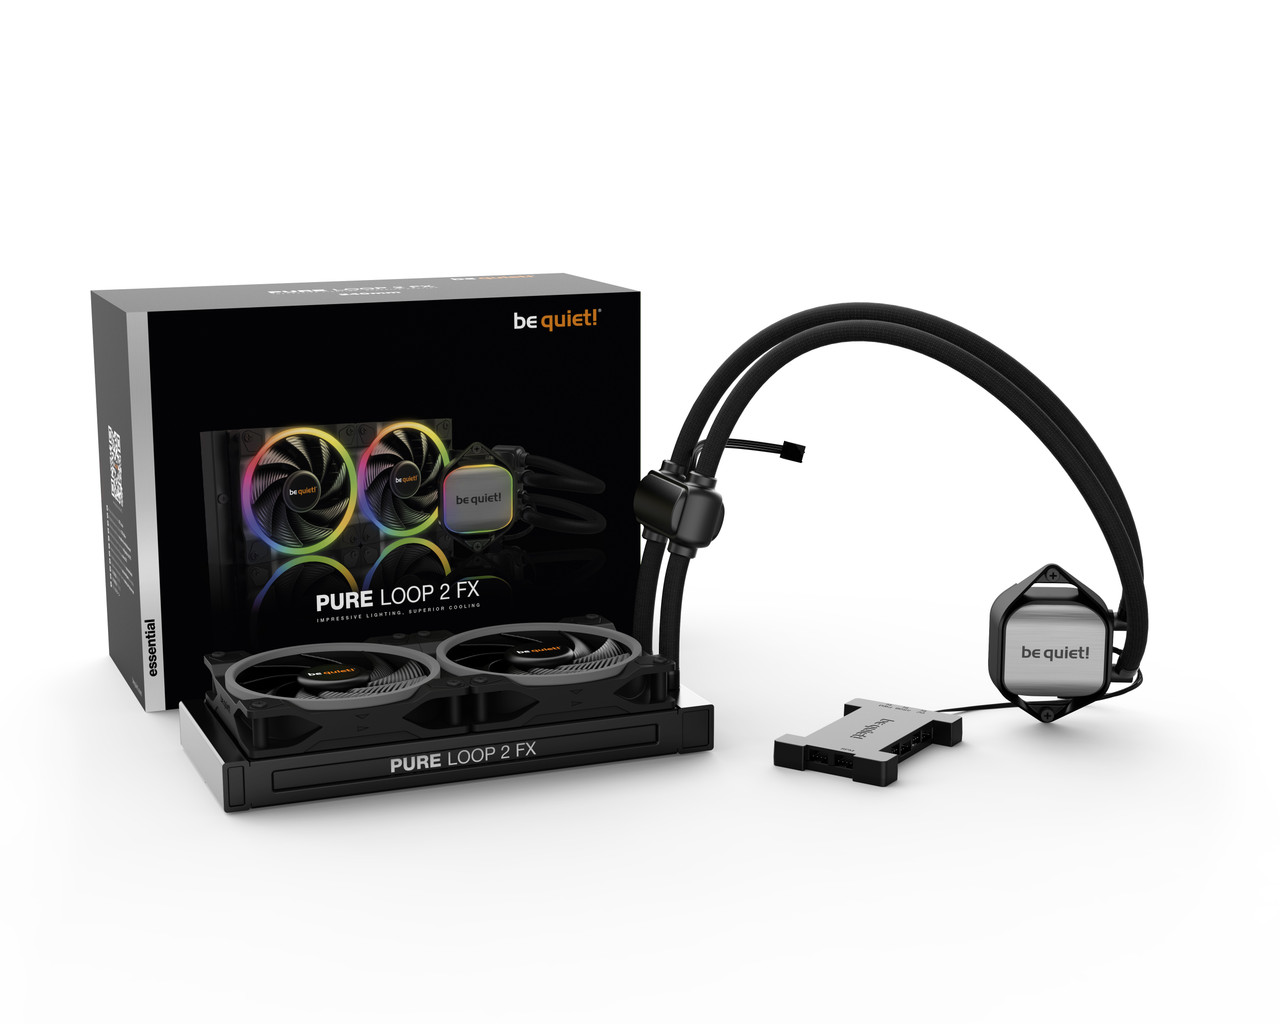 be quiet! PURE LOOP 2 FX IMPRESSIVE LIGHTING, SUPERIOR COOLING WATER COOLERS